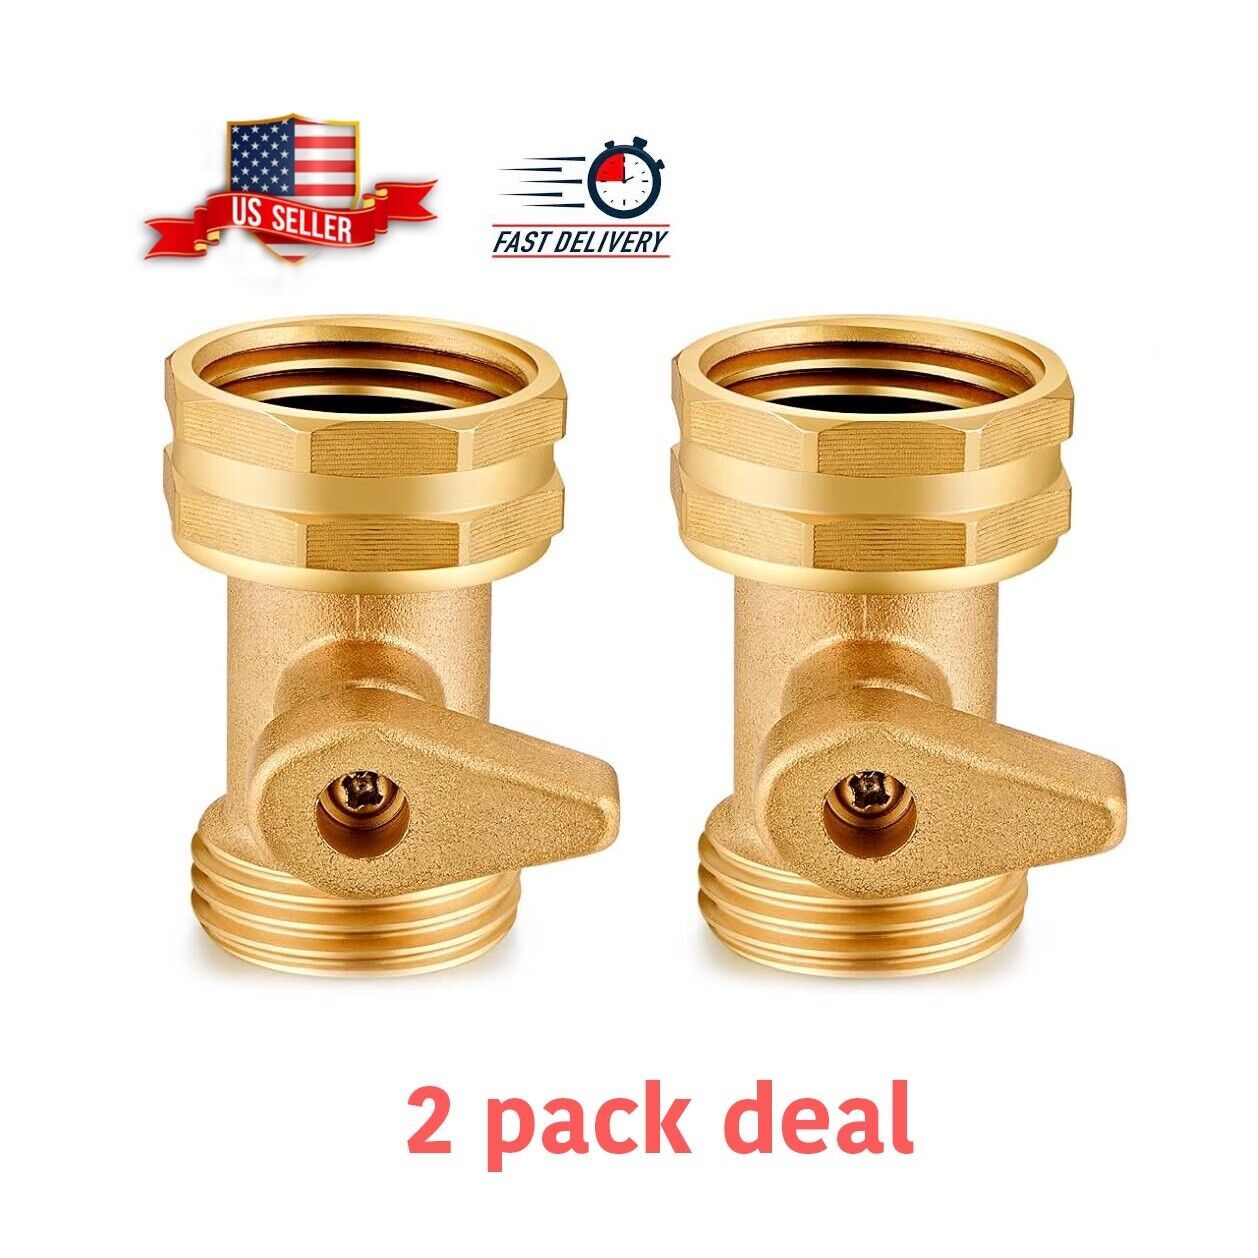 Primary image for Heavy Duty Brass Garden Hose Shut Off Valve Connector- 2 Pack